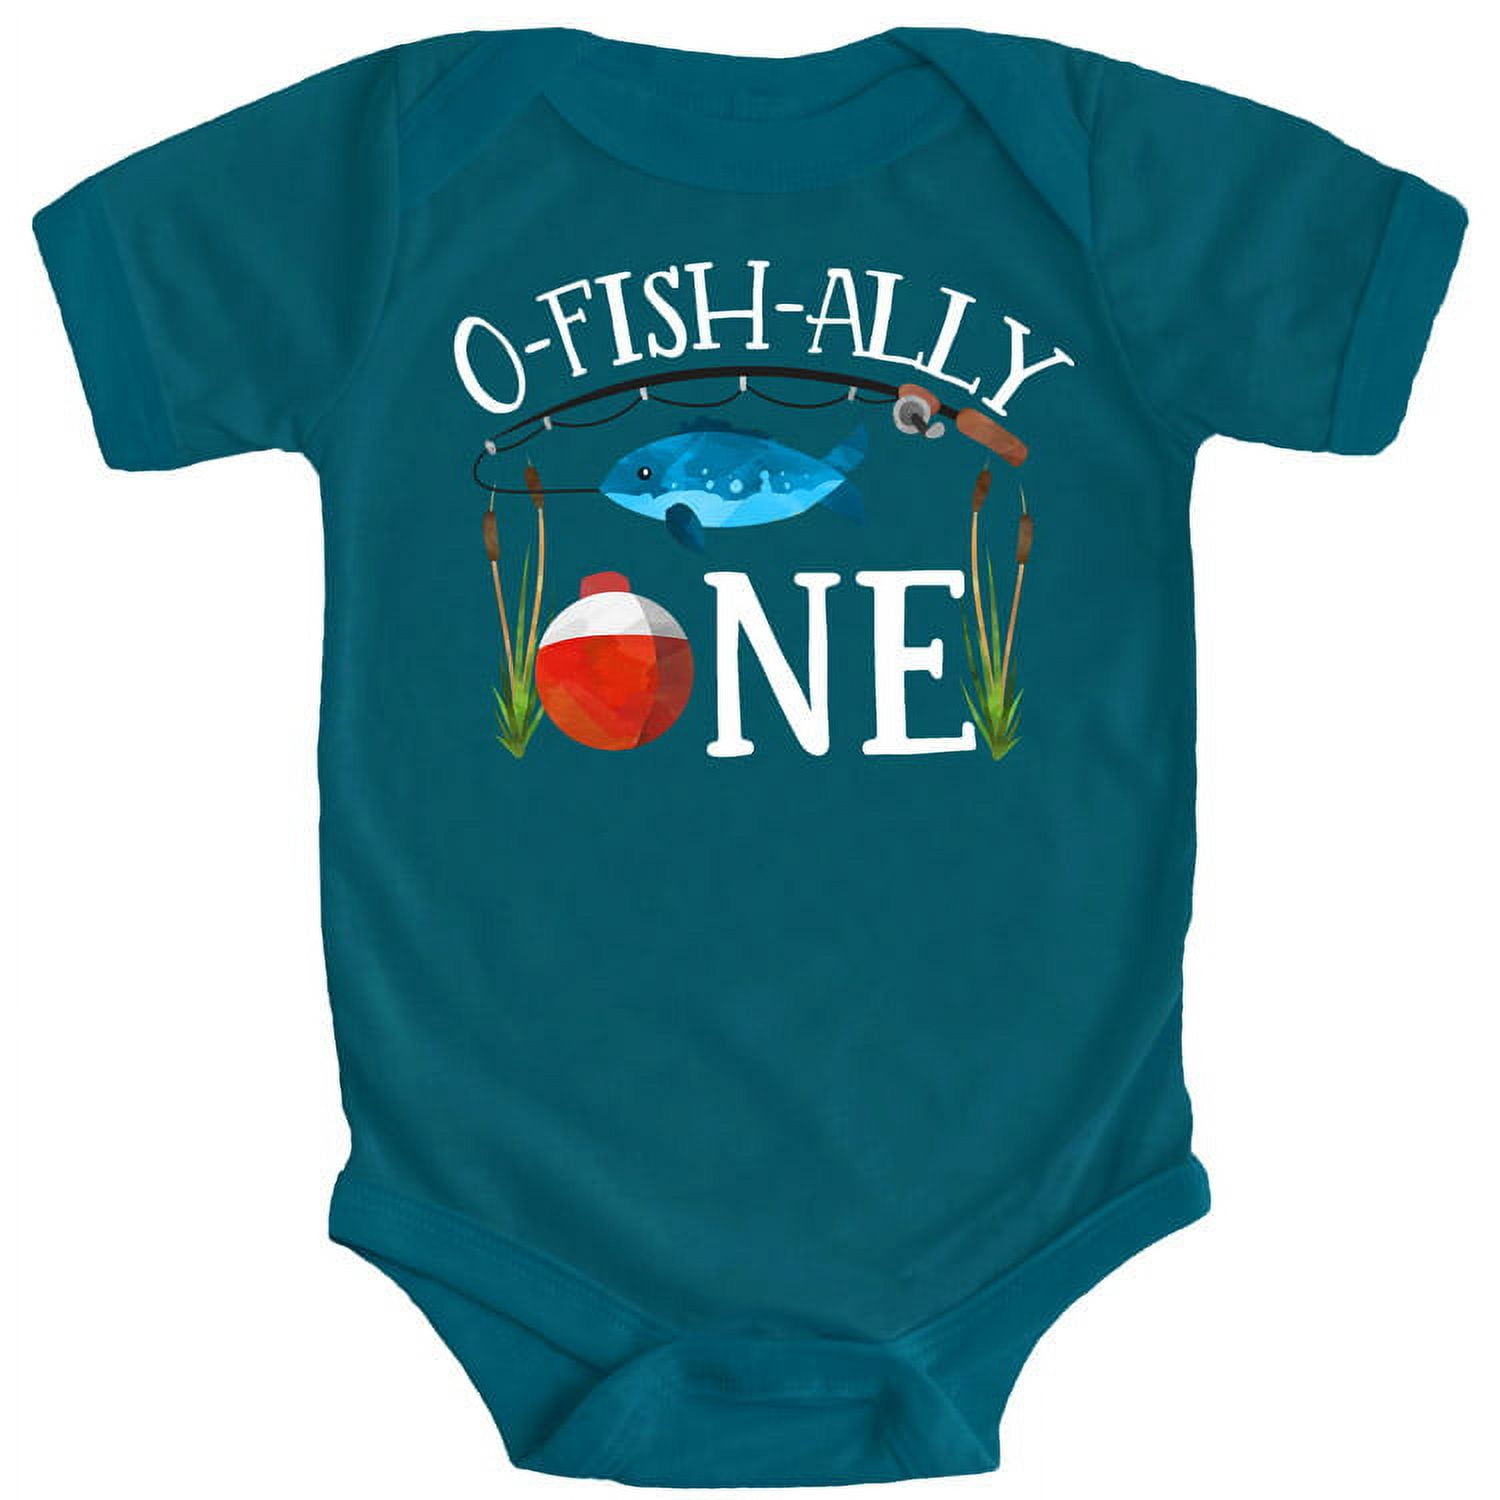 O-Fish-Ally One Boys 1st Birthday Bodysuit for Baby Boys Fishing First  Birthday Outfit Oceanside Bodysuit 18 Months 